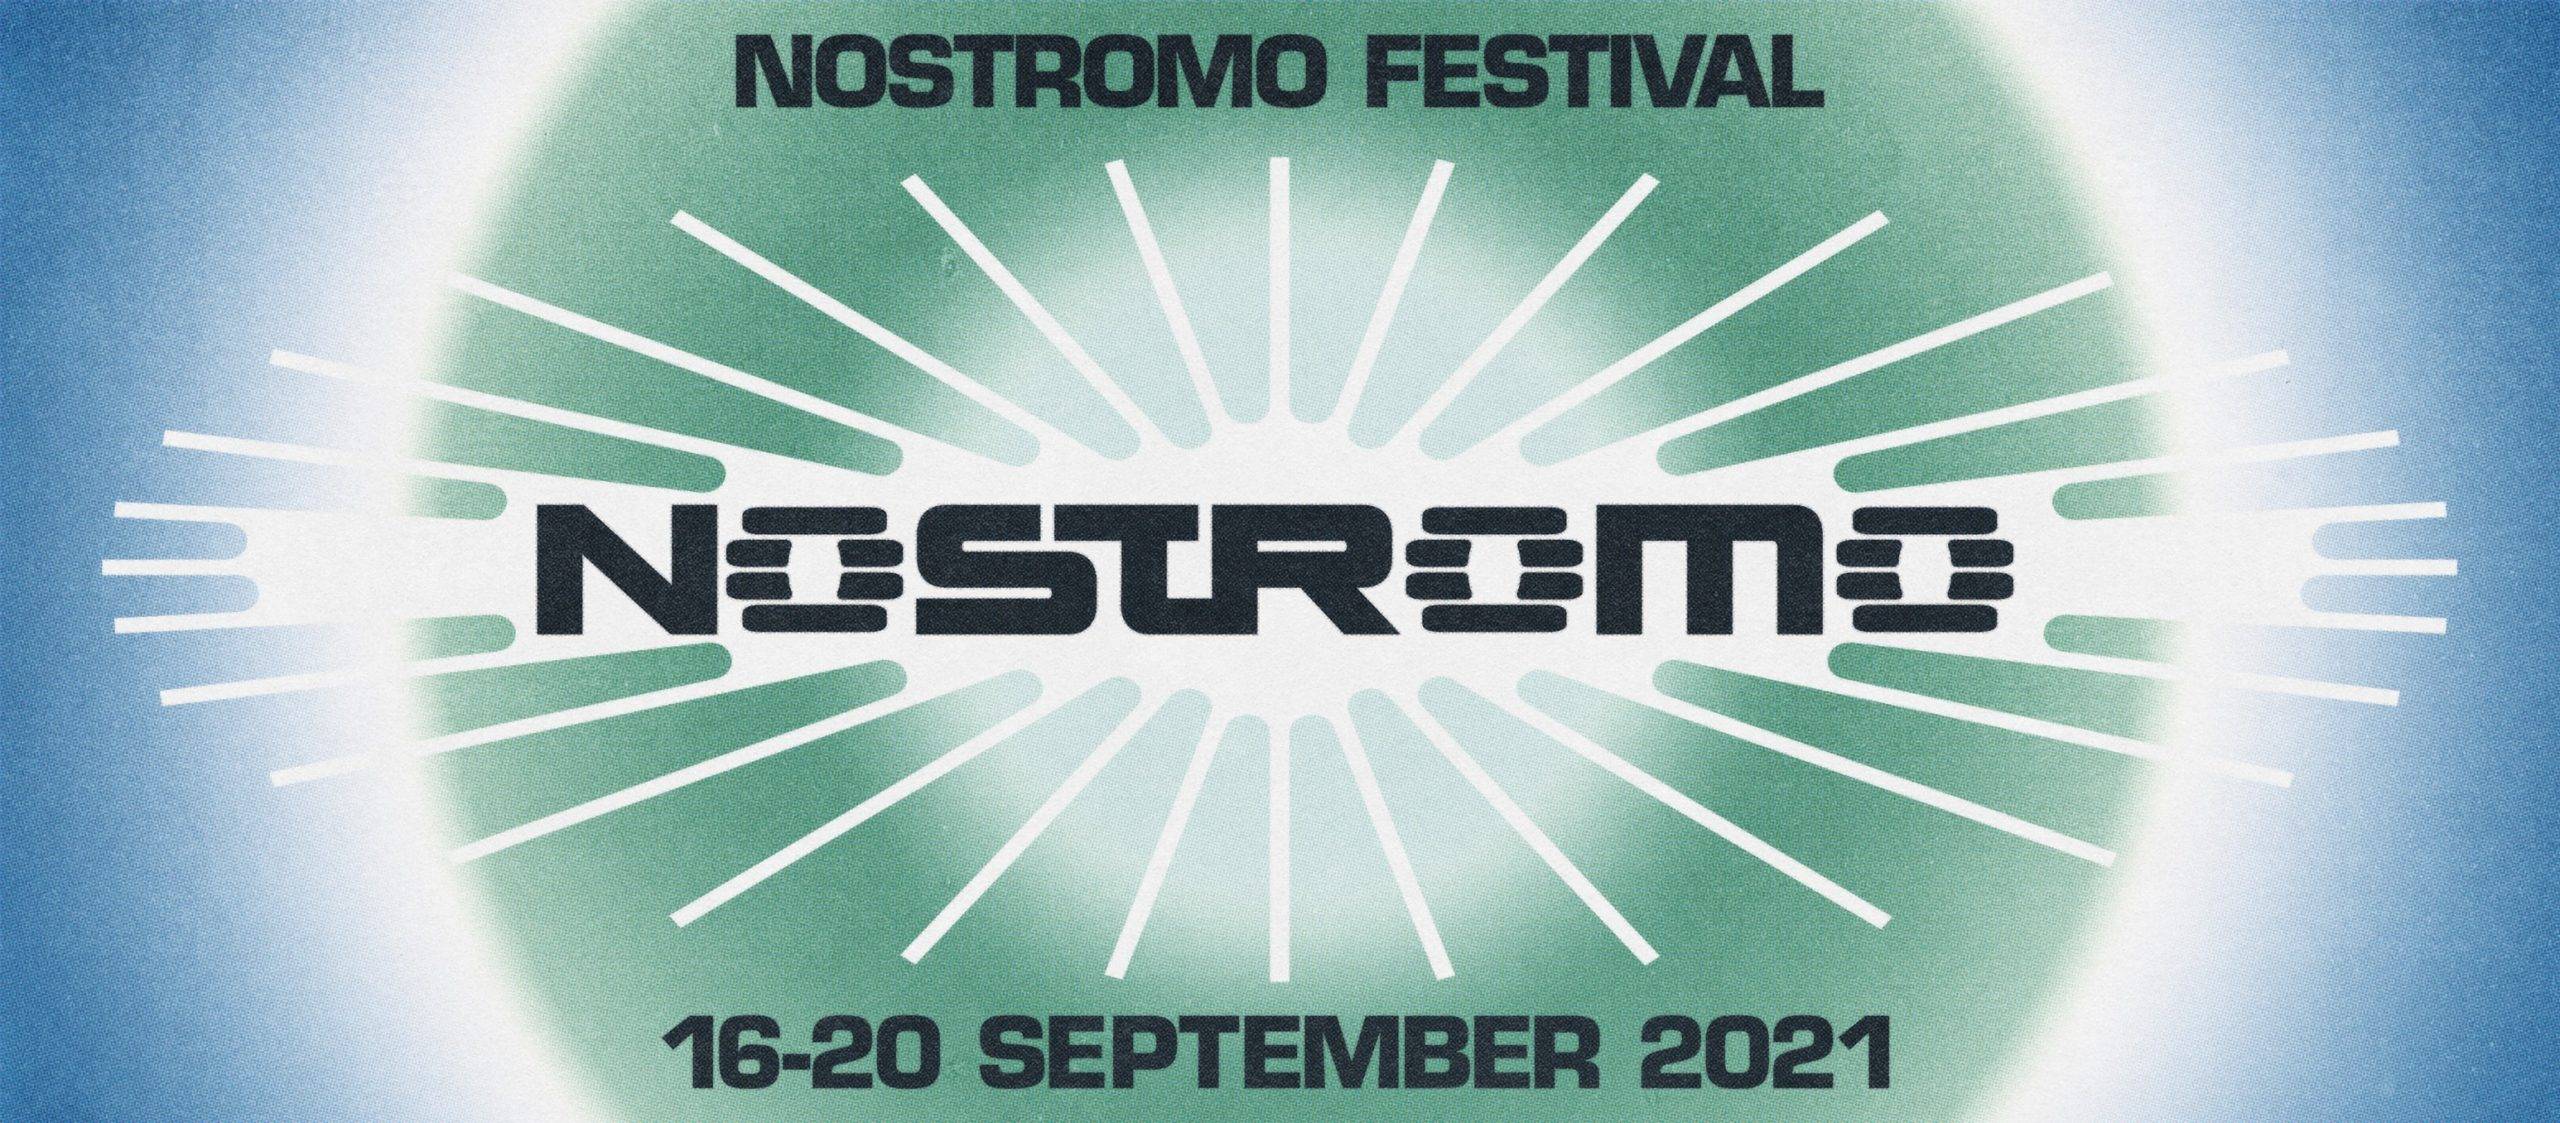 Nostromo festival has announced a lineup of 120 artists for its September edition